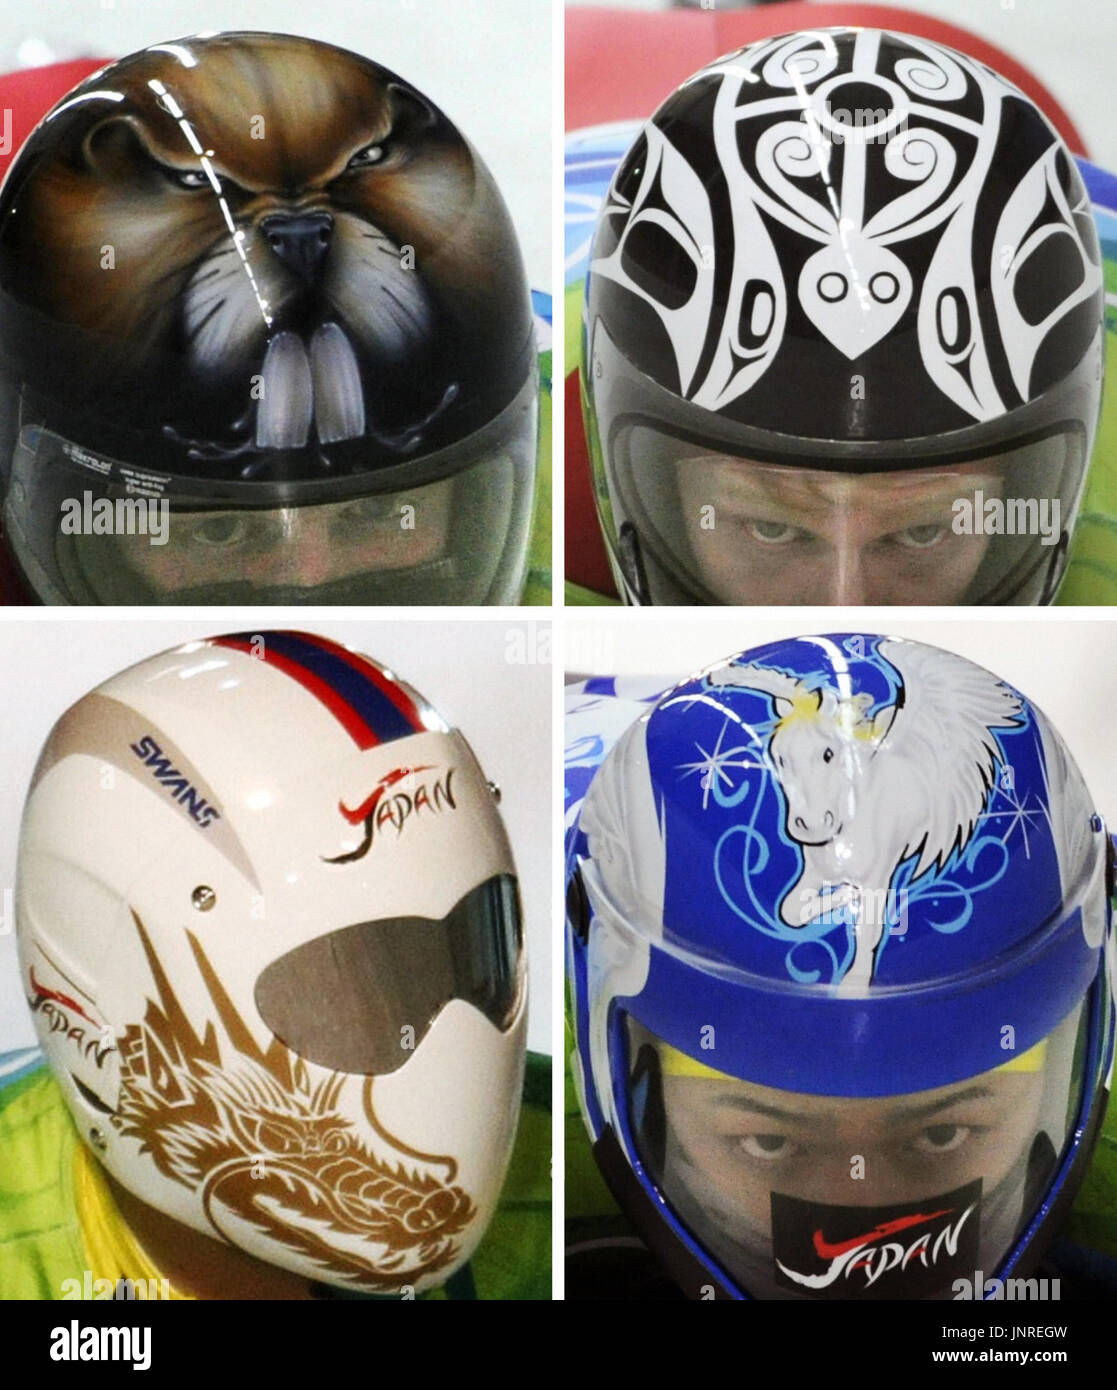 WHISTLER, Canada - Composite photo shows the helmets of Vancouver Olympic skeleton racers featuring animals: Clockwise from left top, a beaver on Canadian Jeff Pain, a turtle on Canadian Jon Montgomery, Pegasus on Japanese Shinsuke Tayama and a dragon on Japanese Kazuhiro Koshi. (Kyodo) Stock Photo